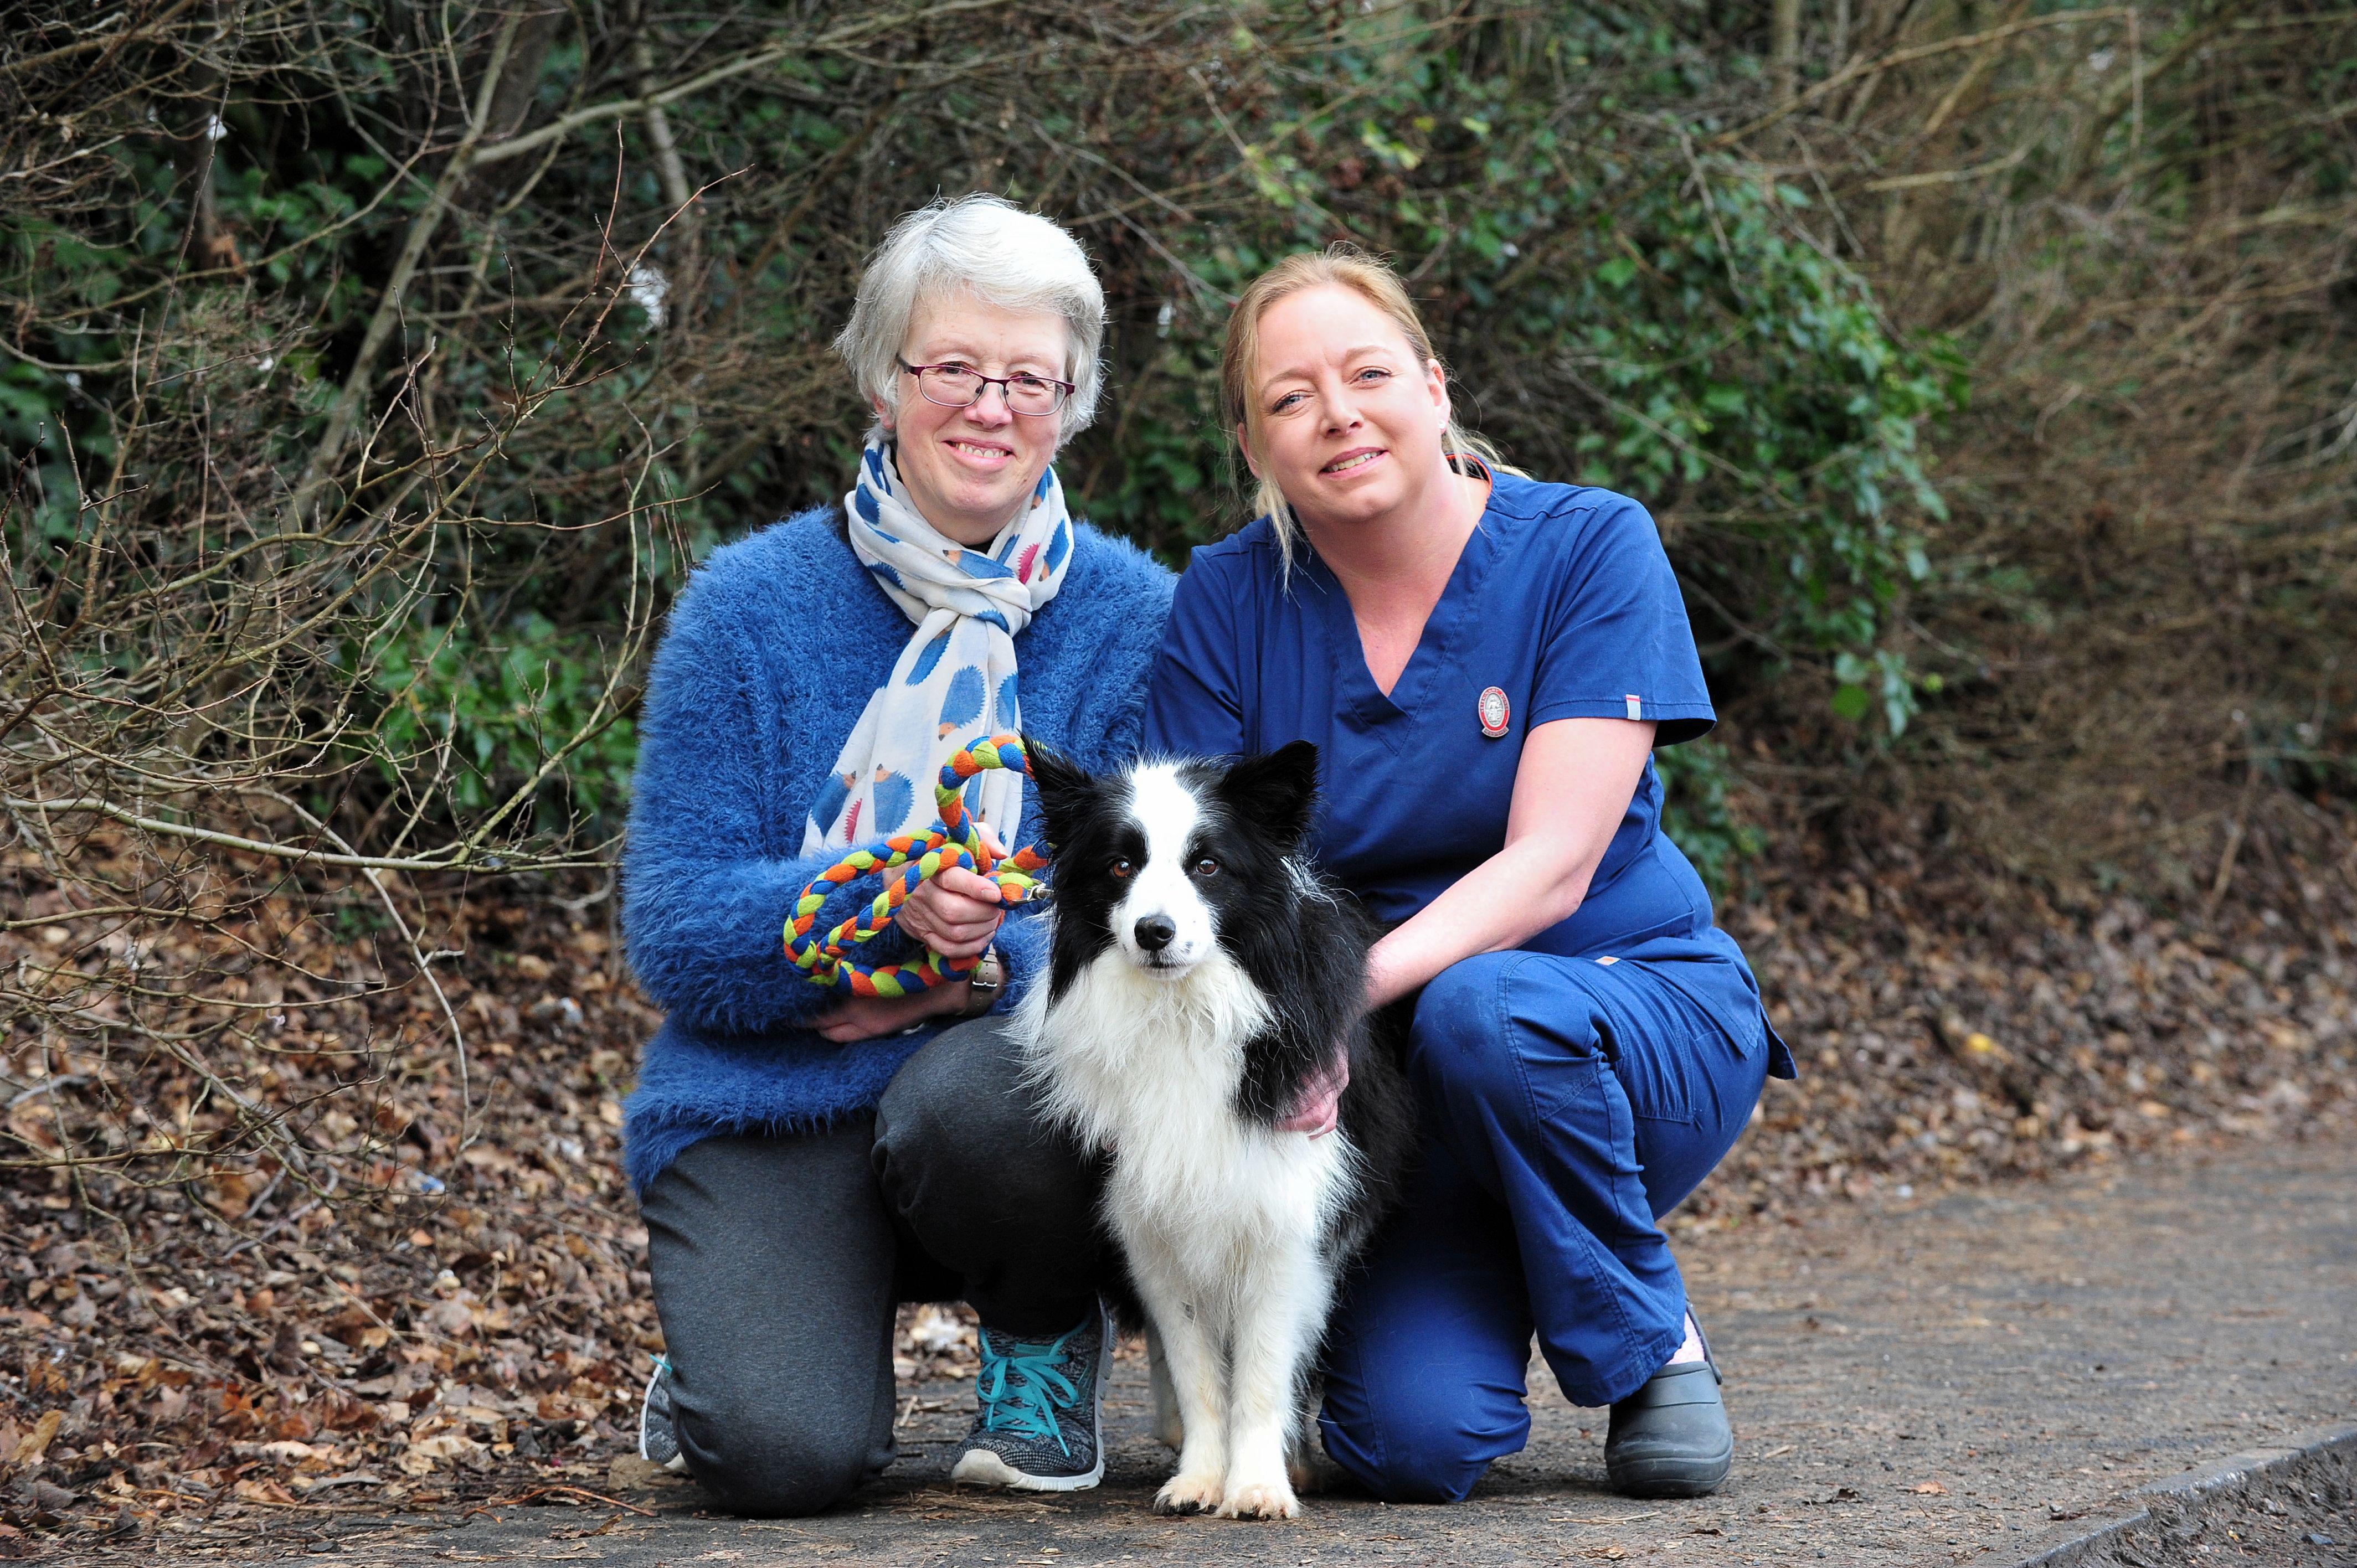 Images Severn Veterinary Centre, Alcester